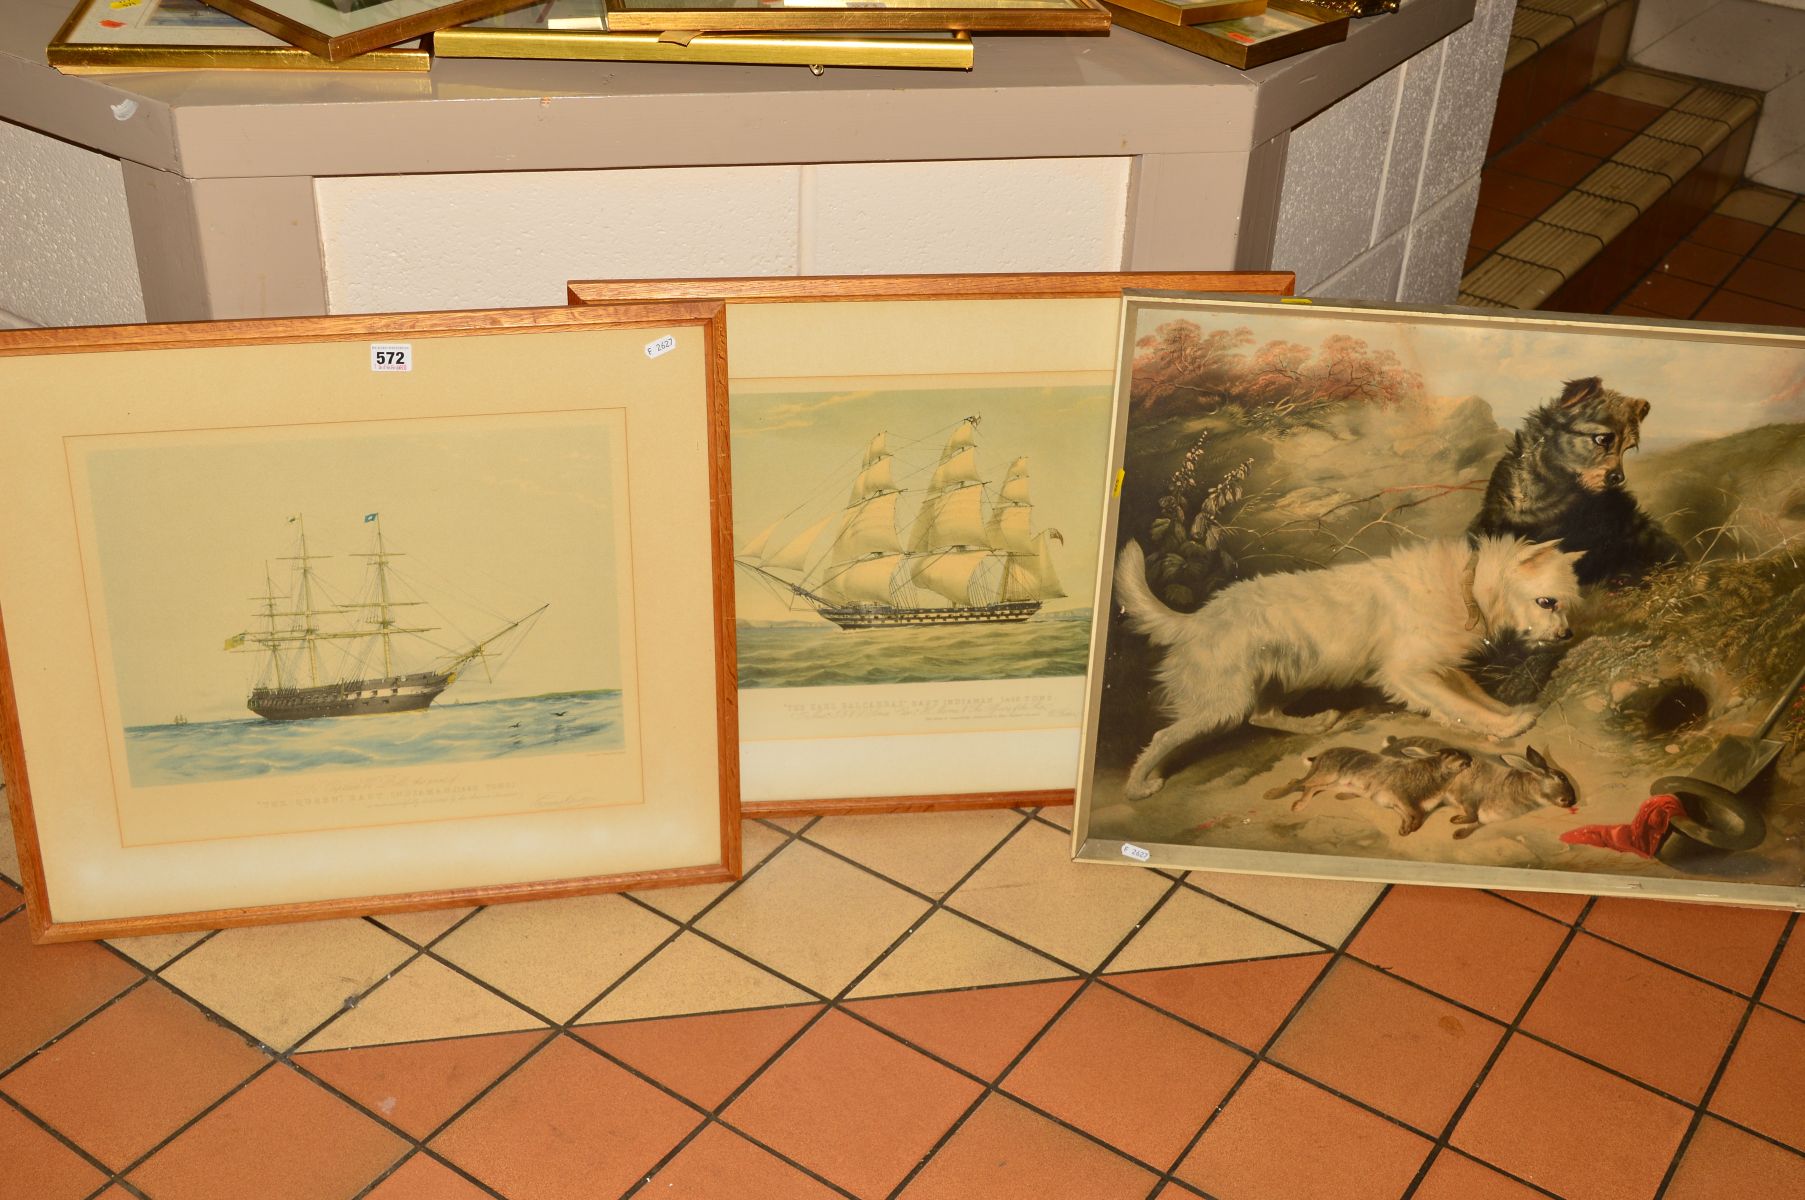 A PAIR OF MARITIME PRINTS 'The Queen, East Indiaman' by Thomas Dutton and 'The Earl Balcarras,